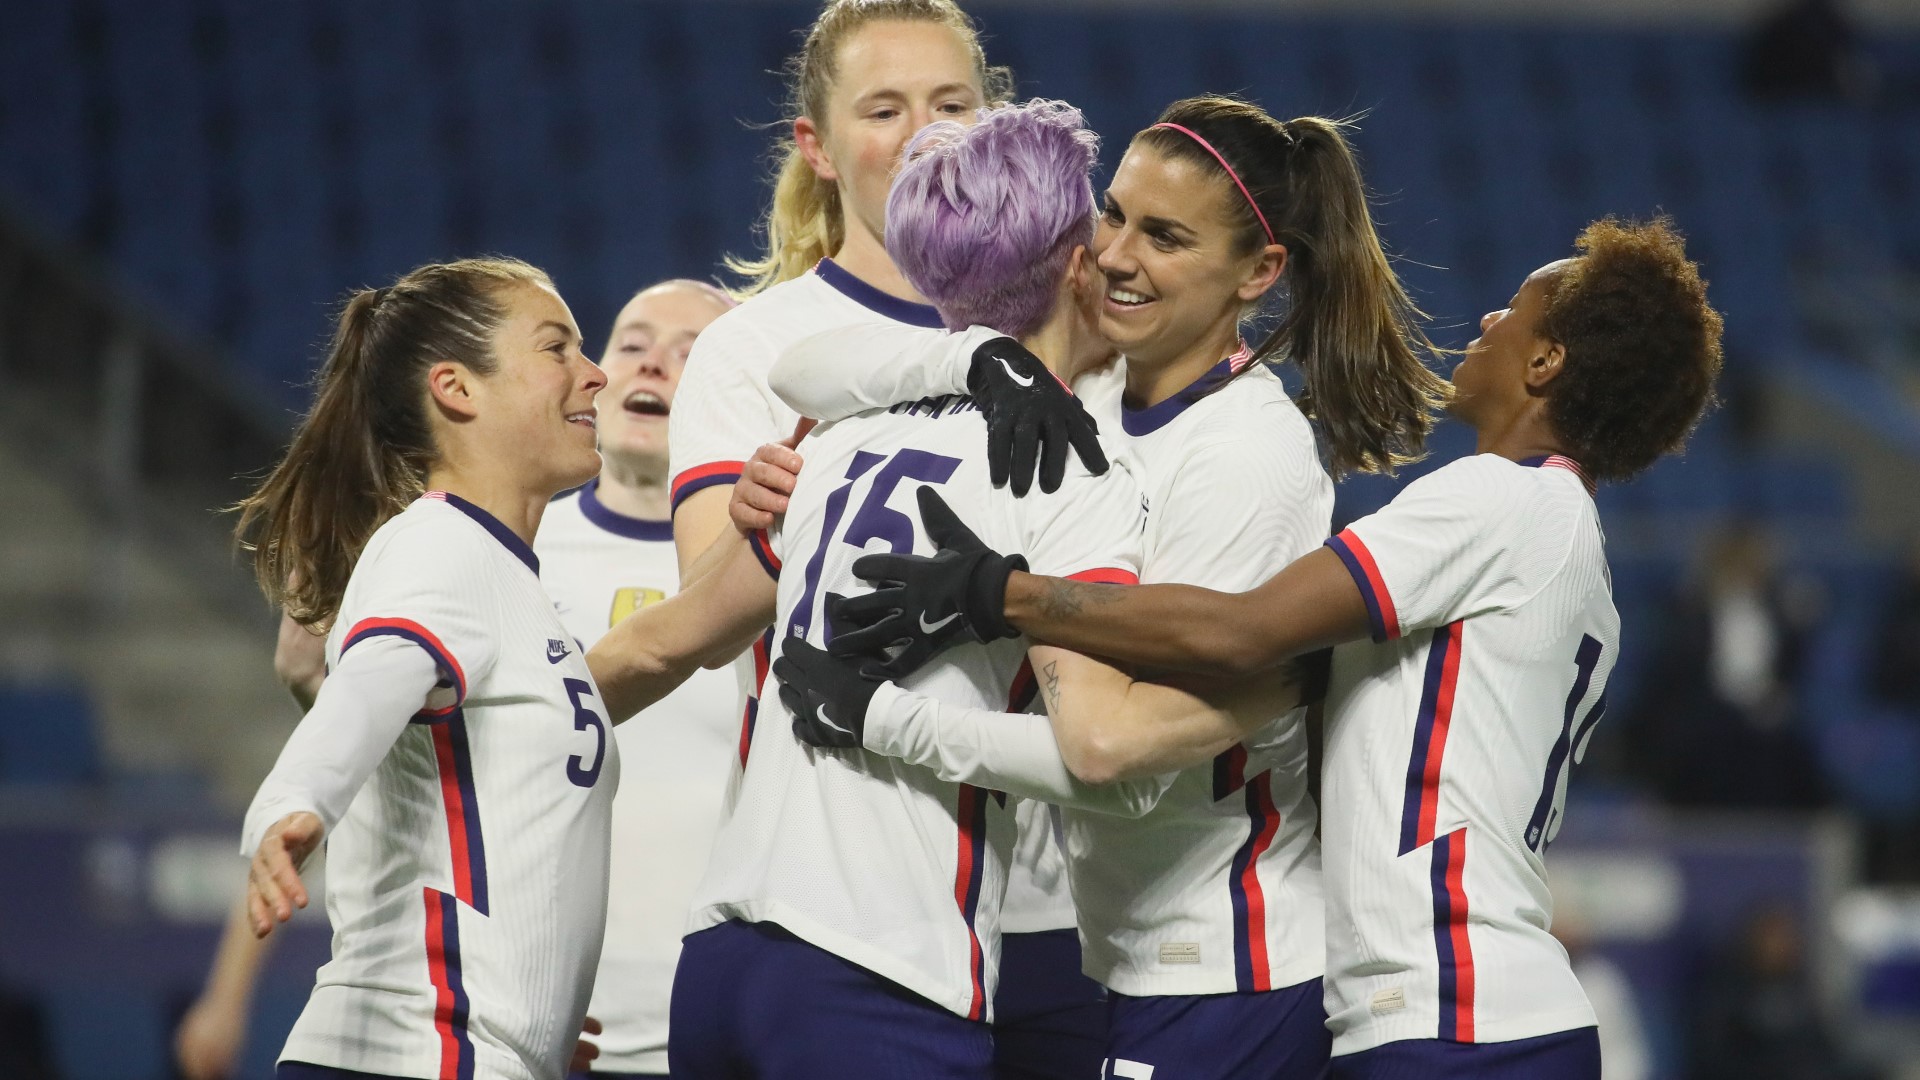 The U.S. women’s soccer team won bronze in Tokyo but what’s the latest on their fight for higher pay? And can NCAA athletes now get paid? We answer those questions.